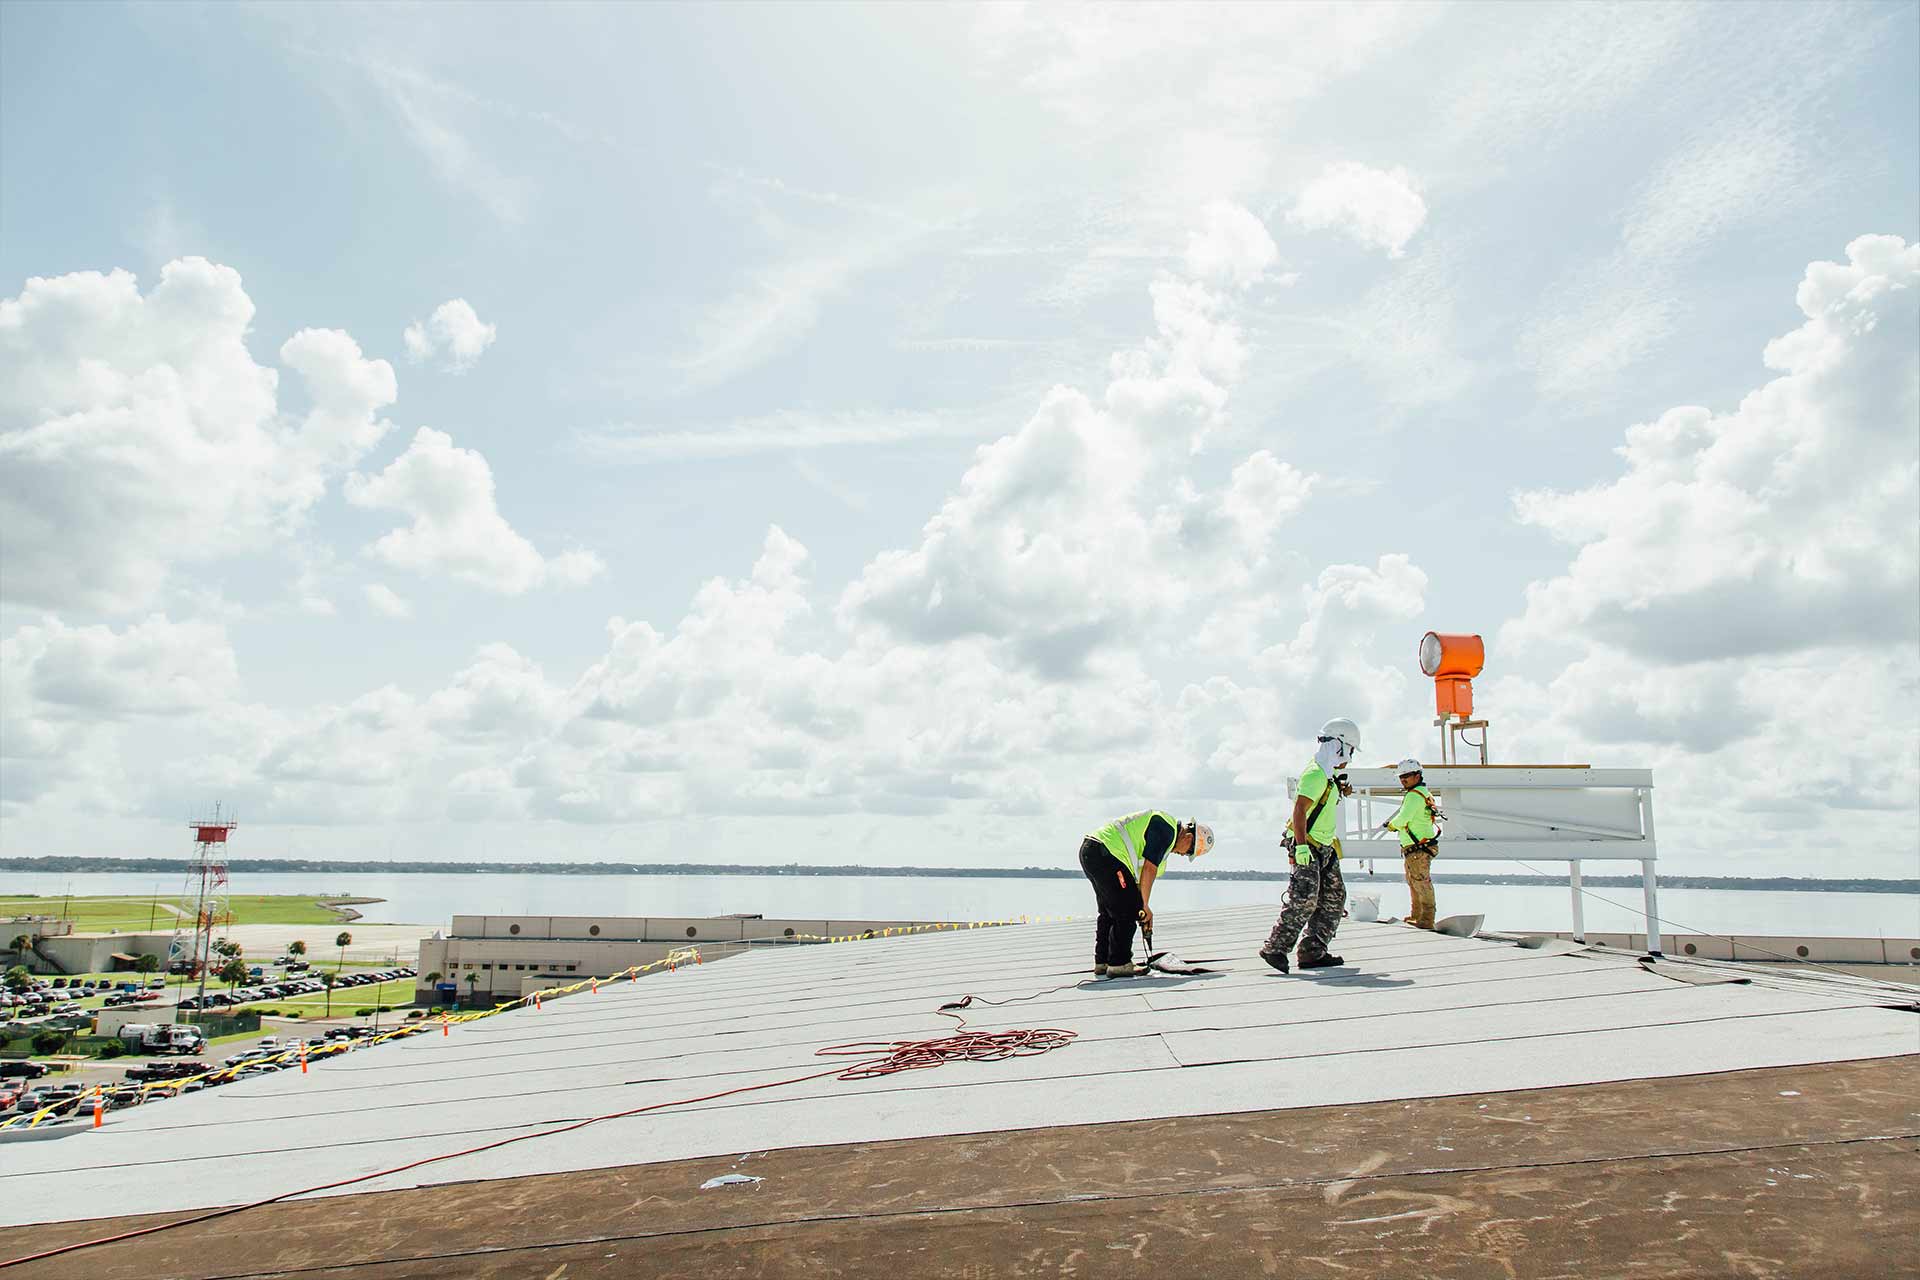 Register Roofing Employees Installing a New Roof on The F-18 Hangar at NAS Jacksonville.